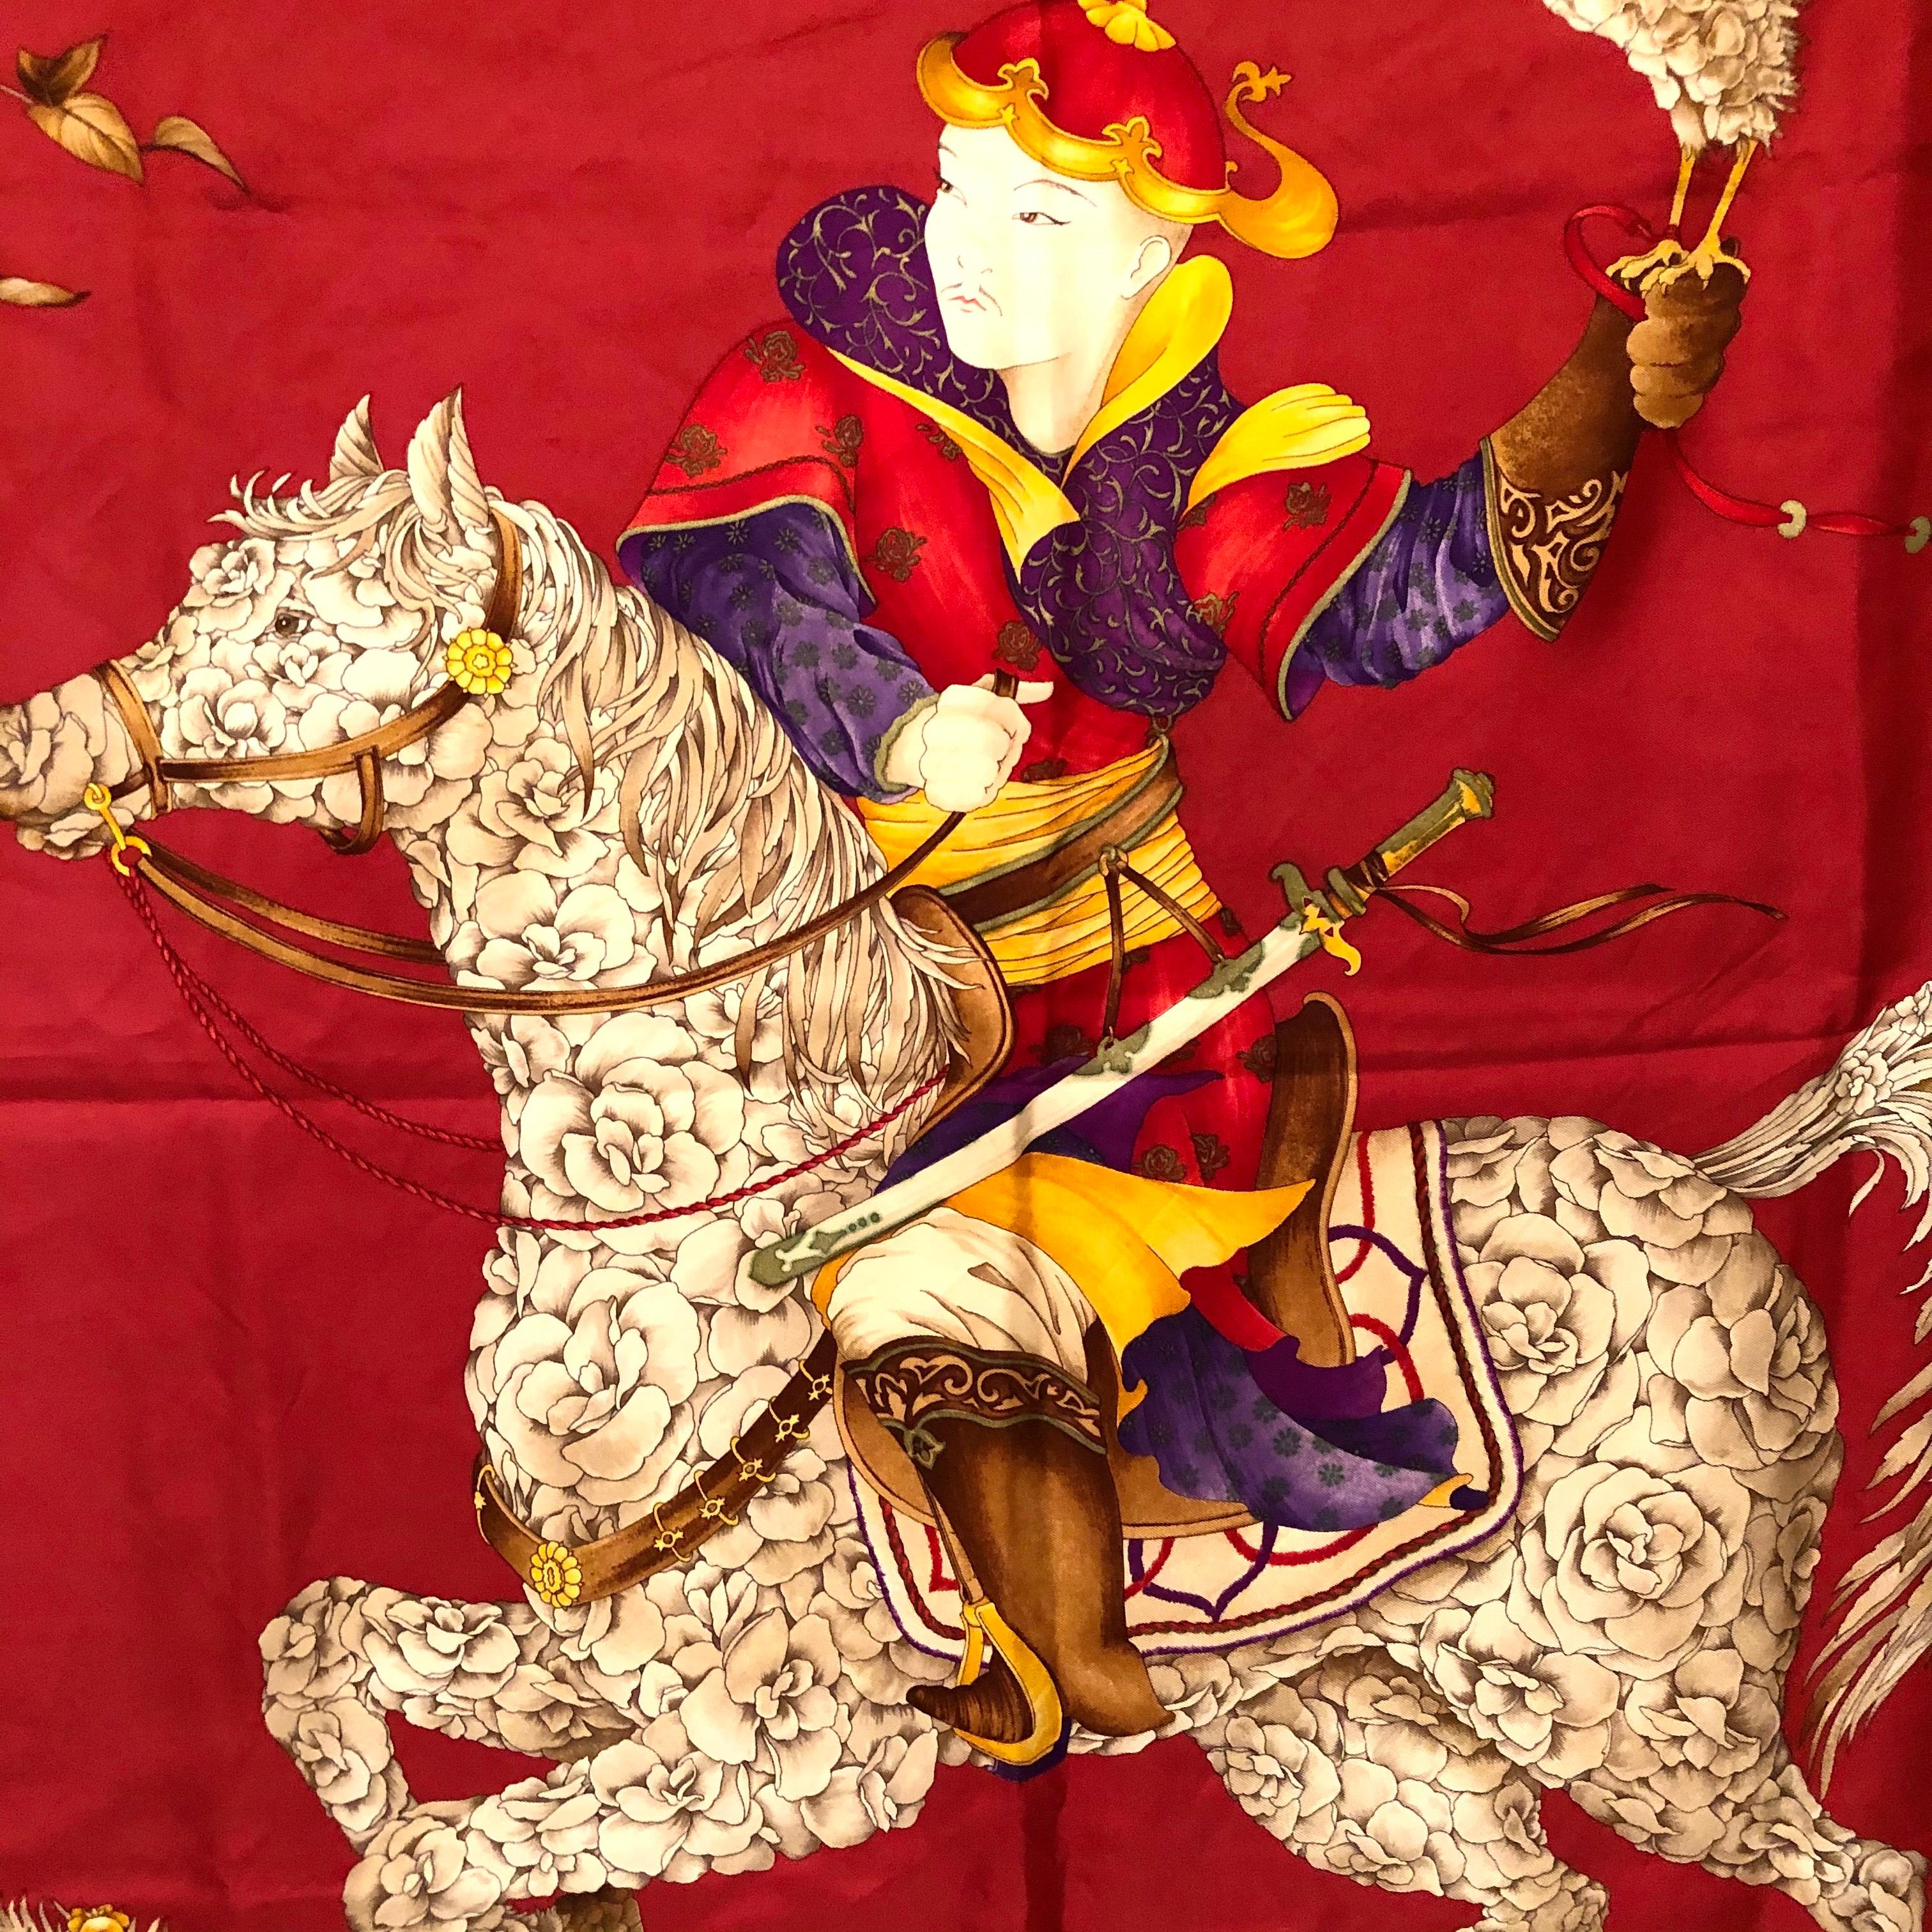 Salvatore Ferragamo red silk scarf with a man on a beautiful horse with a bird on his hand. The design on this scarf is eye catching and wonderful. This would make a beautiful addition to any fashion ensemble. It would also be a fabulous scarf to